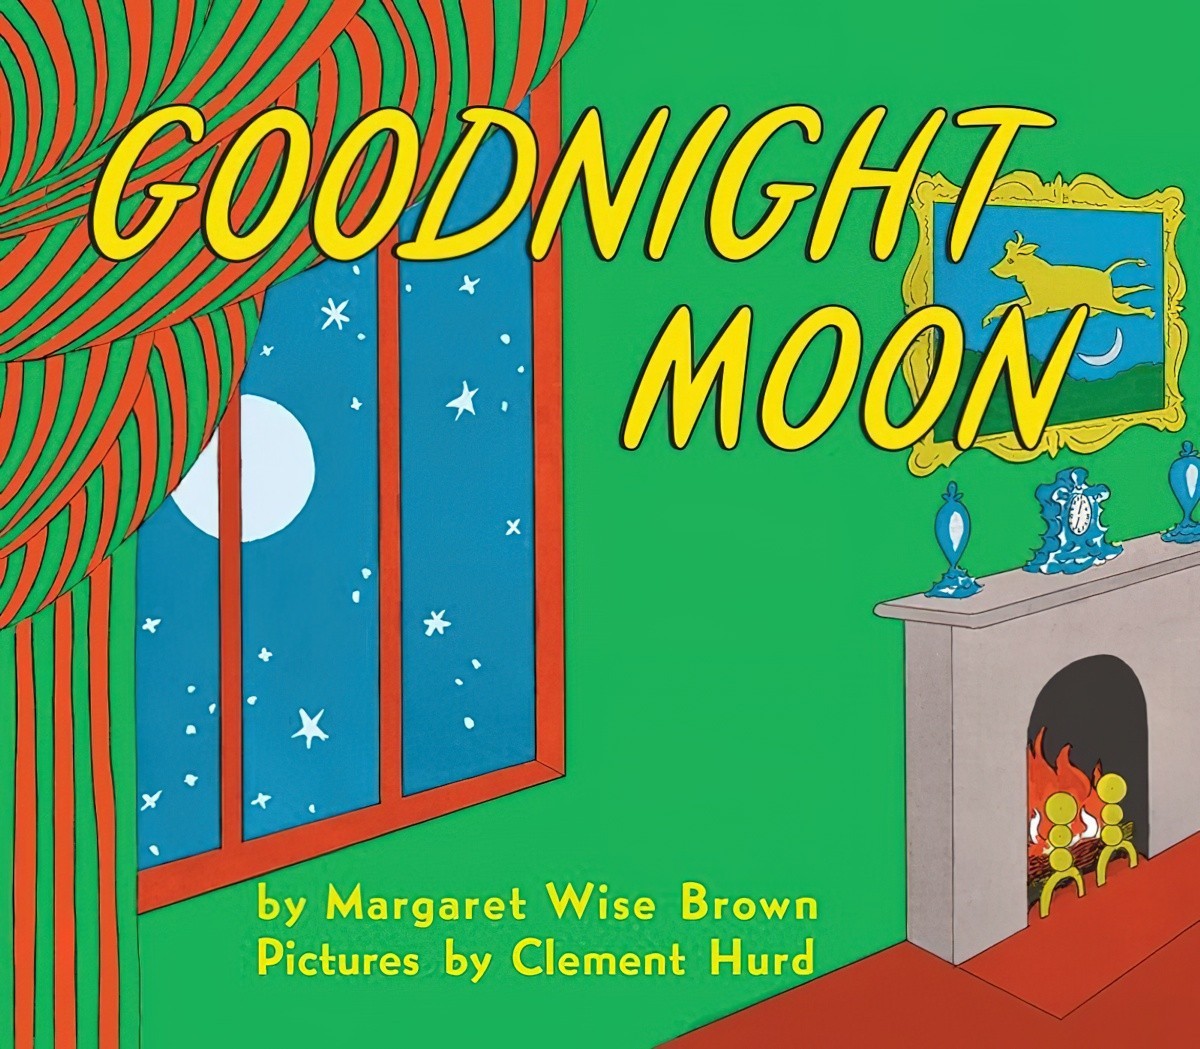 Goodnight Moon by Margaret Wise Brown Analysis